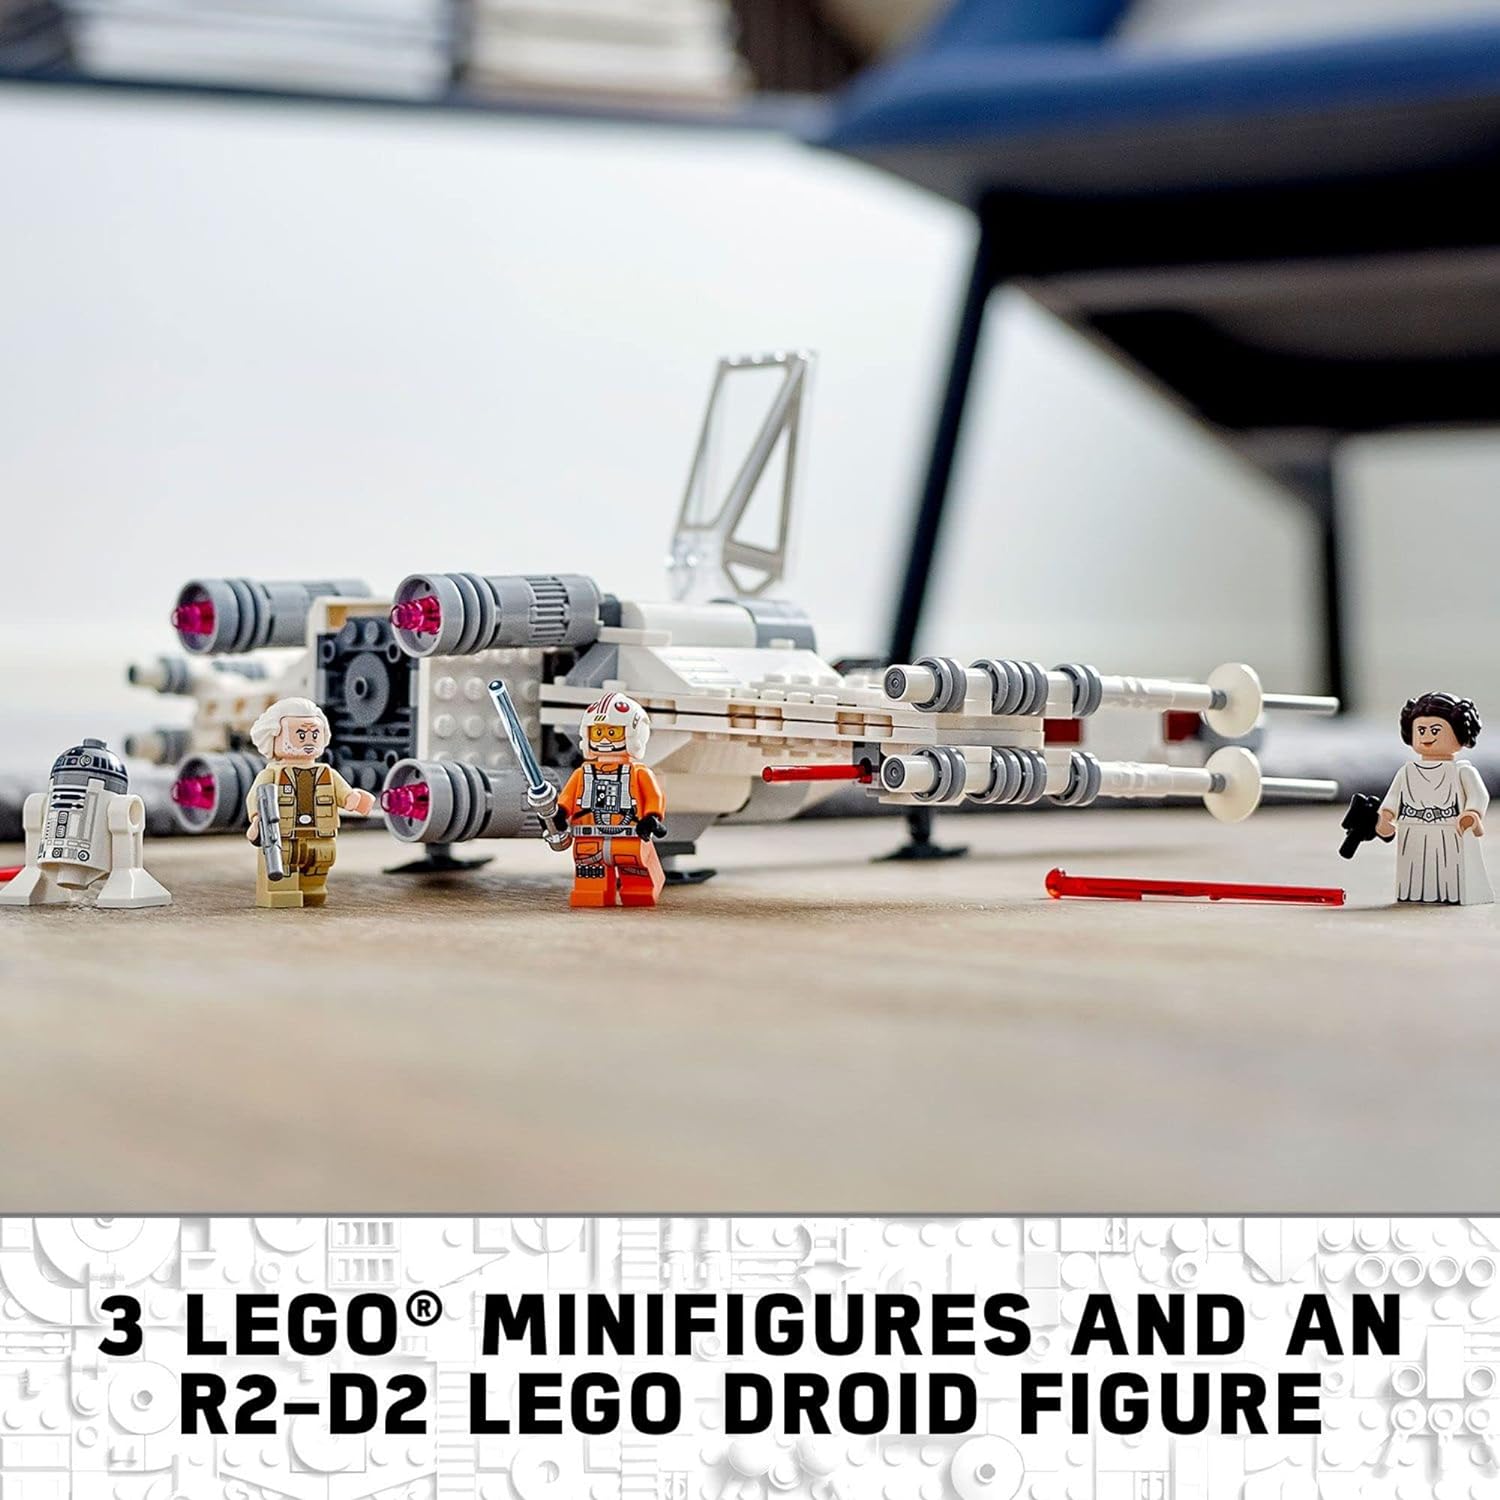 LEGO Star Wars Luke Skywalker's X-Wing Fighter 75301 Building Toy, Gifts for Kids, Boys & Girls with Princess Leia Minifigure and R2-D2 Droid Figure - image 7 of 7